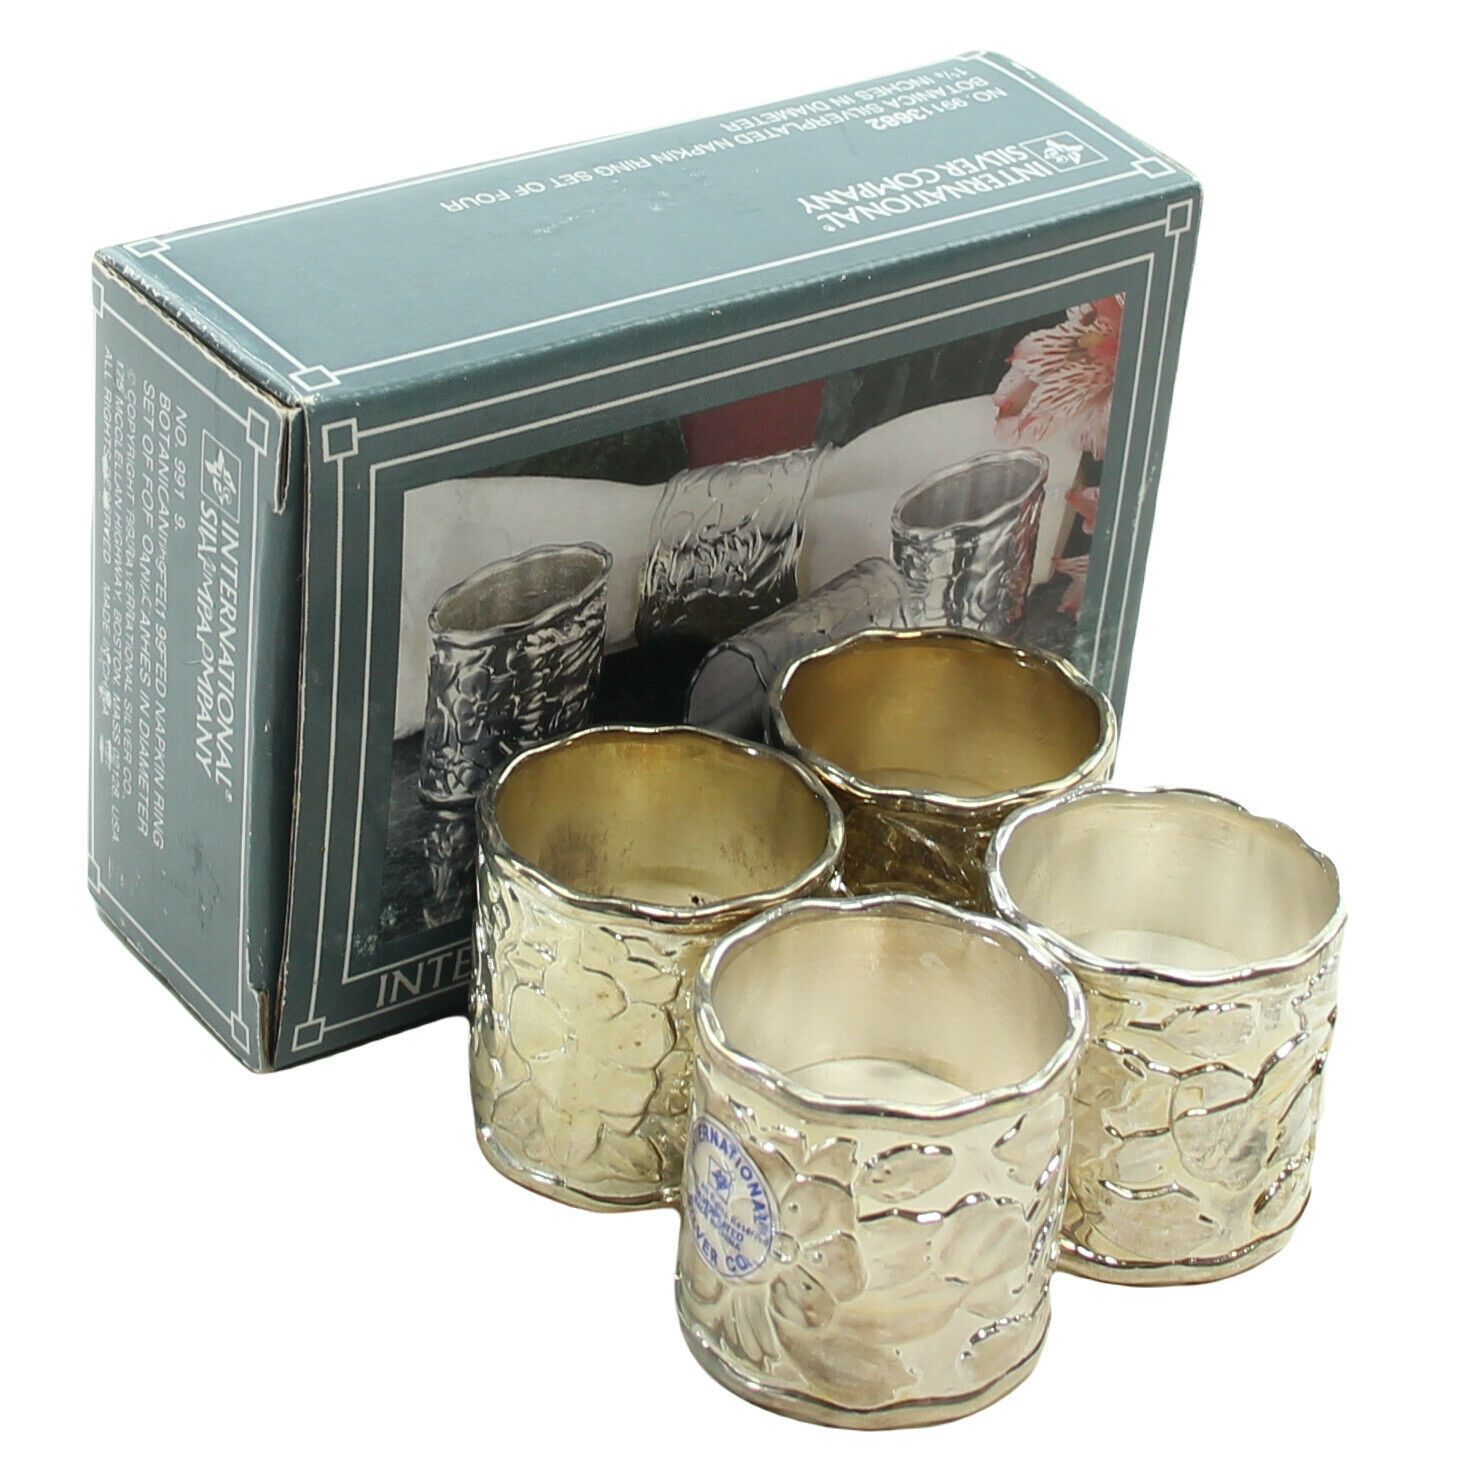 Primary image for International Silver Company Botanica Silverplated Set of 4 Napkin Ring Holders